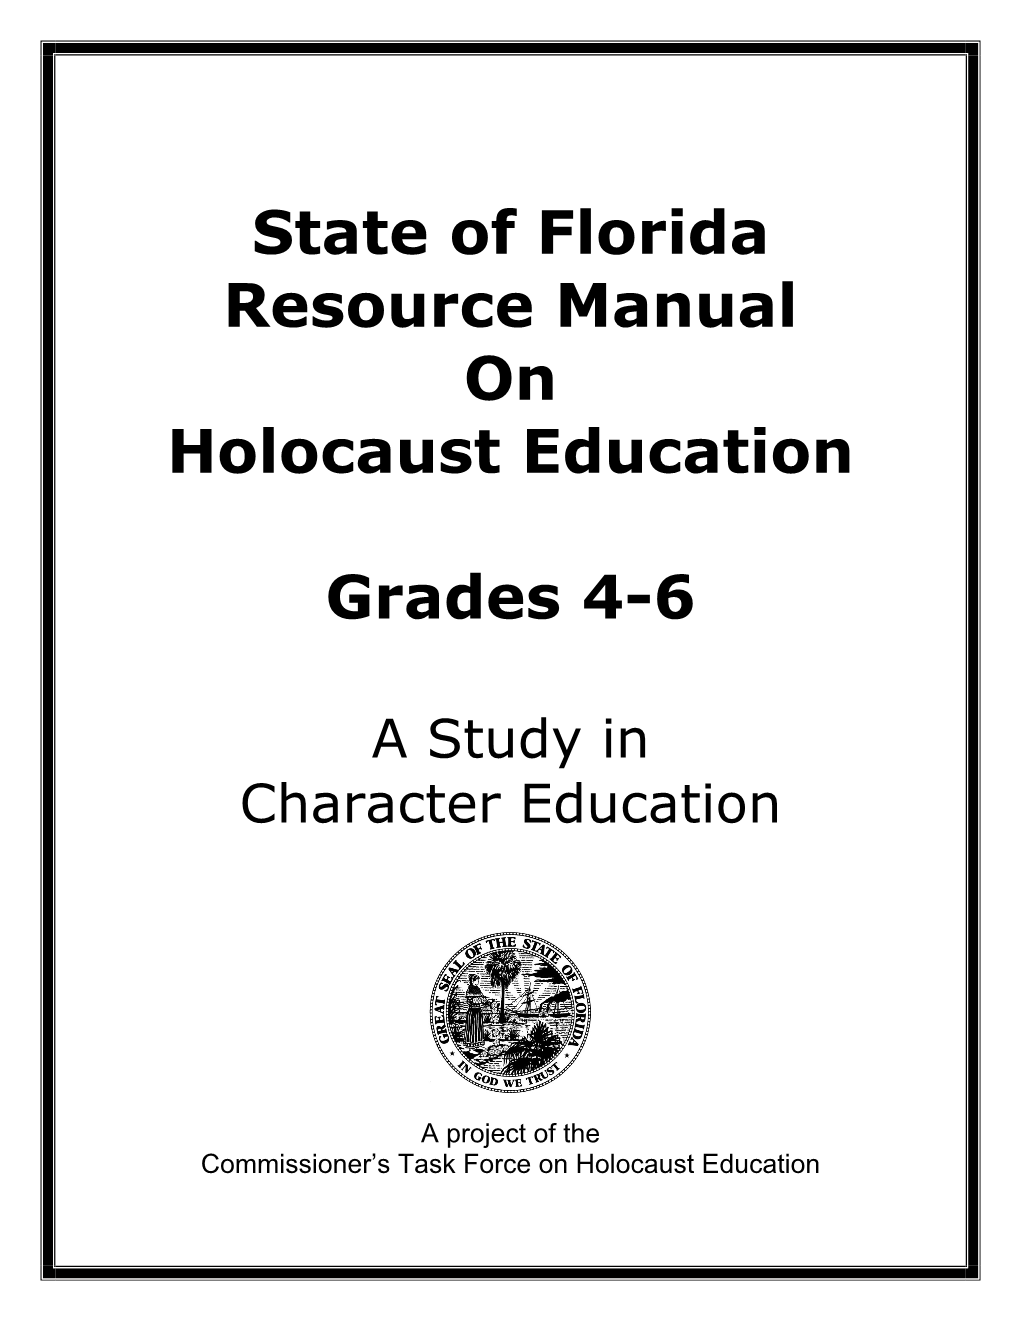 State of Florida Resource Manual on Holocaust Education